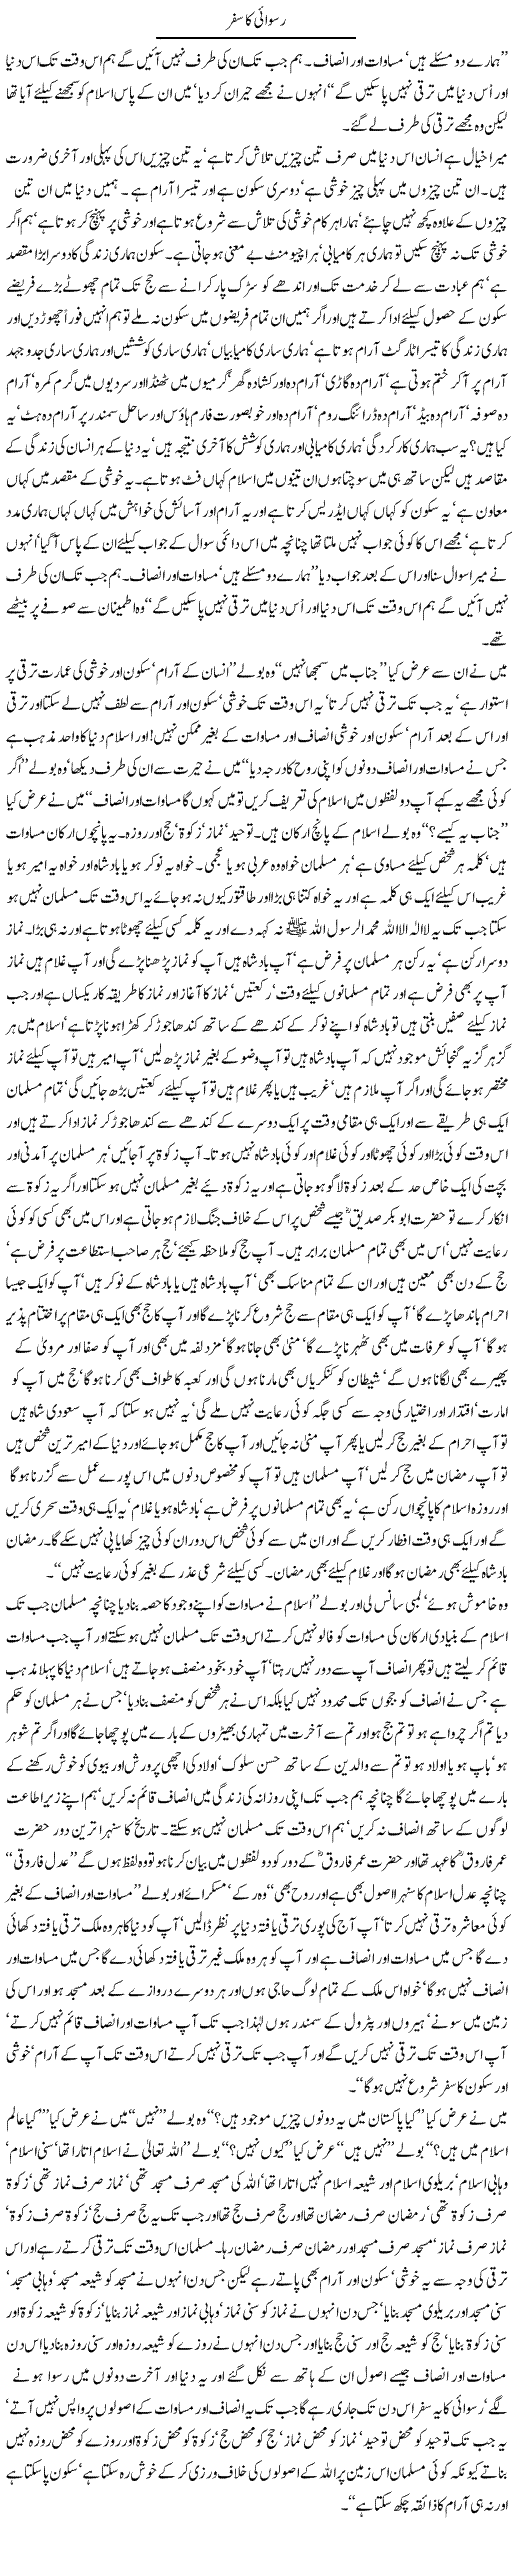 Two Main Problems Express Column Javed Chaudhry 15 May 2011